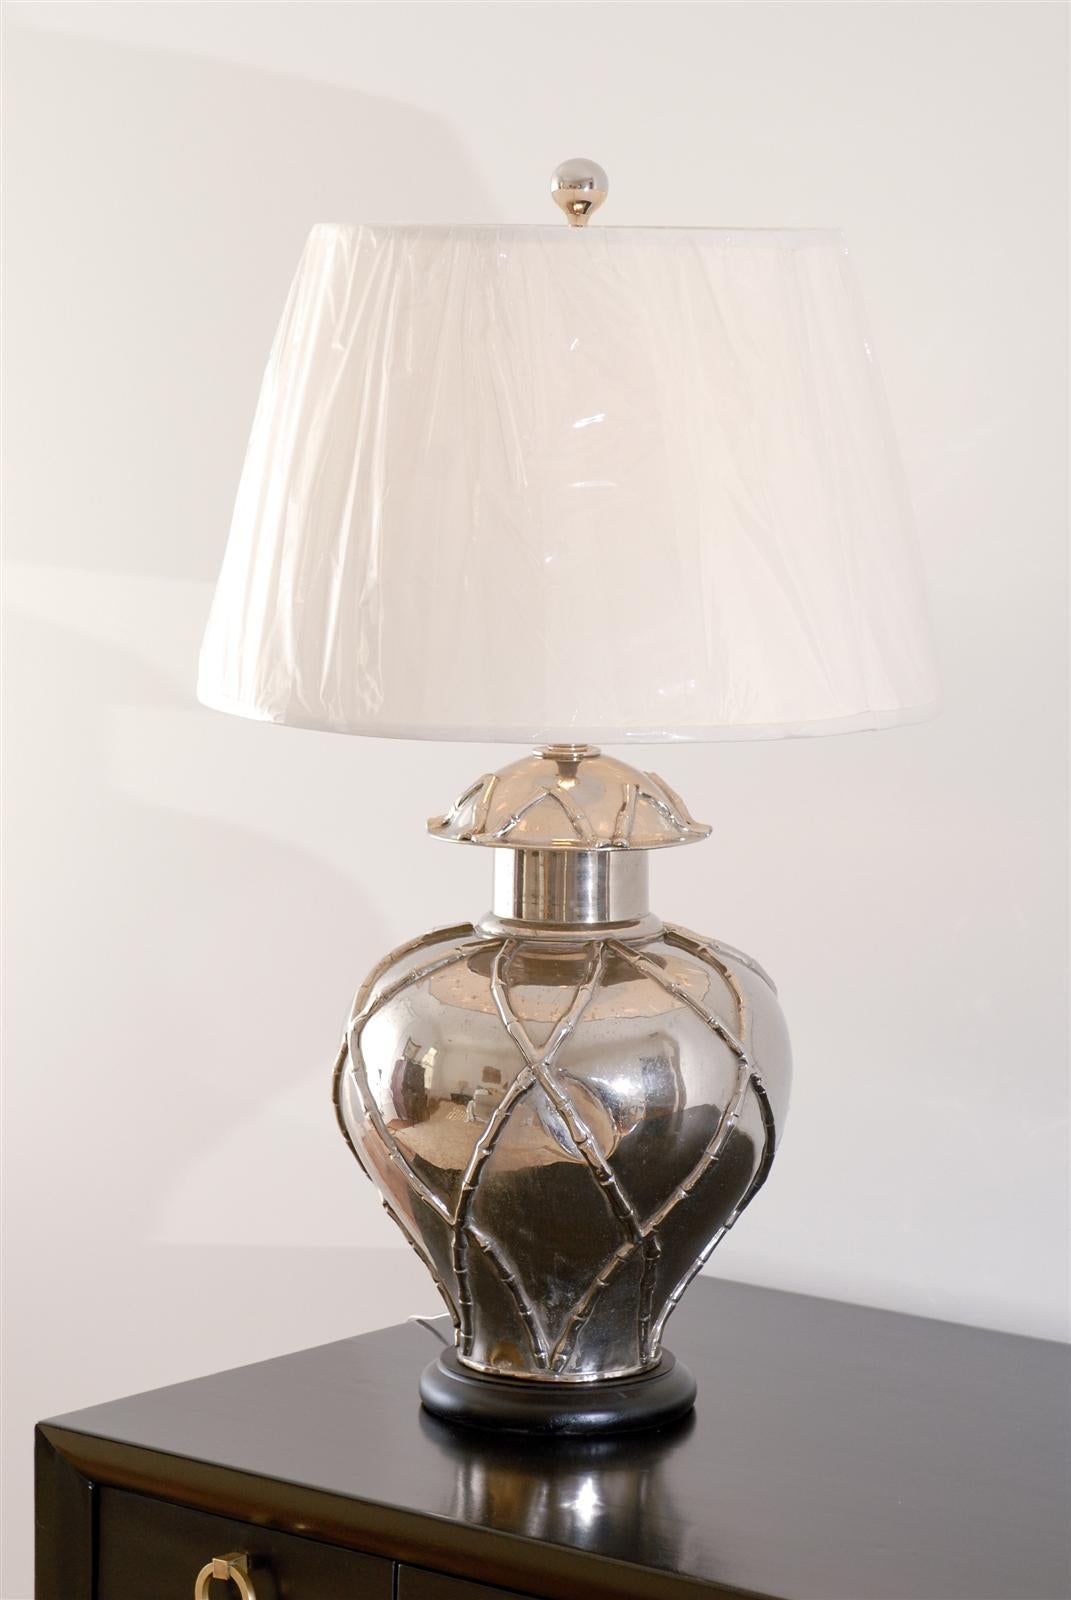 An outstanding pair of vintage ginger jar lamps with beautiful faux bamboo accents, circa 1970. Chrome plate over solid brass. Fine, expertly made pieces with excellent weight and scale. Breathtaking Jewelry! Excellent restored condition. The lamps